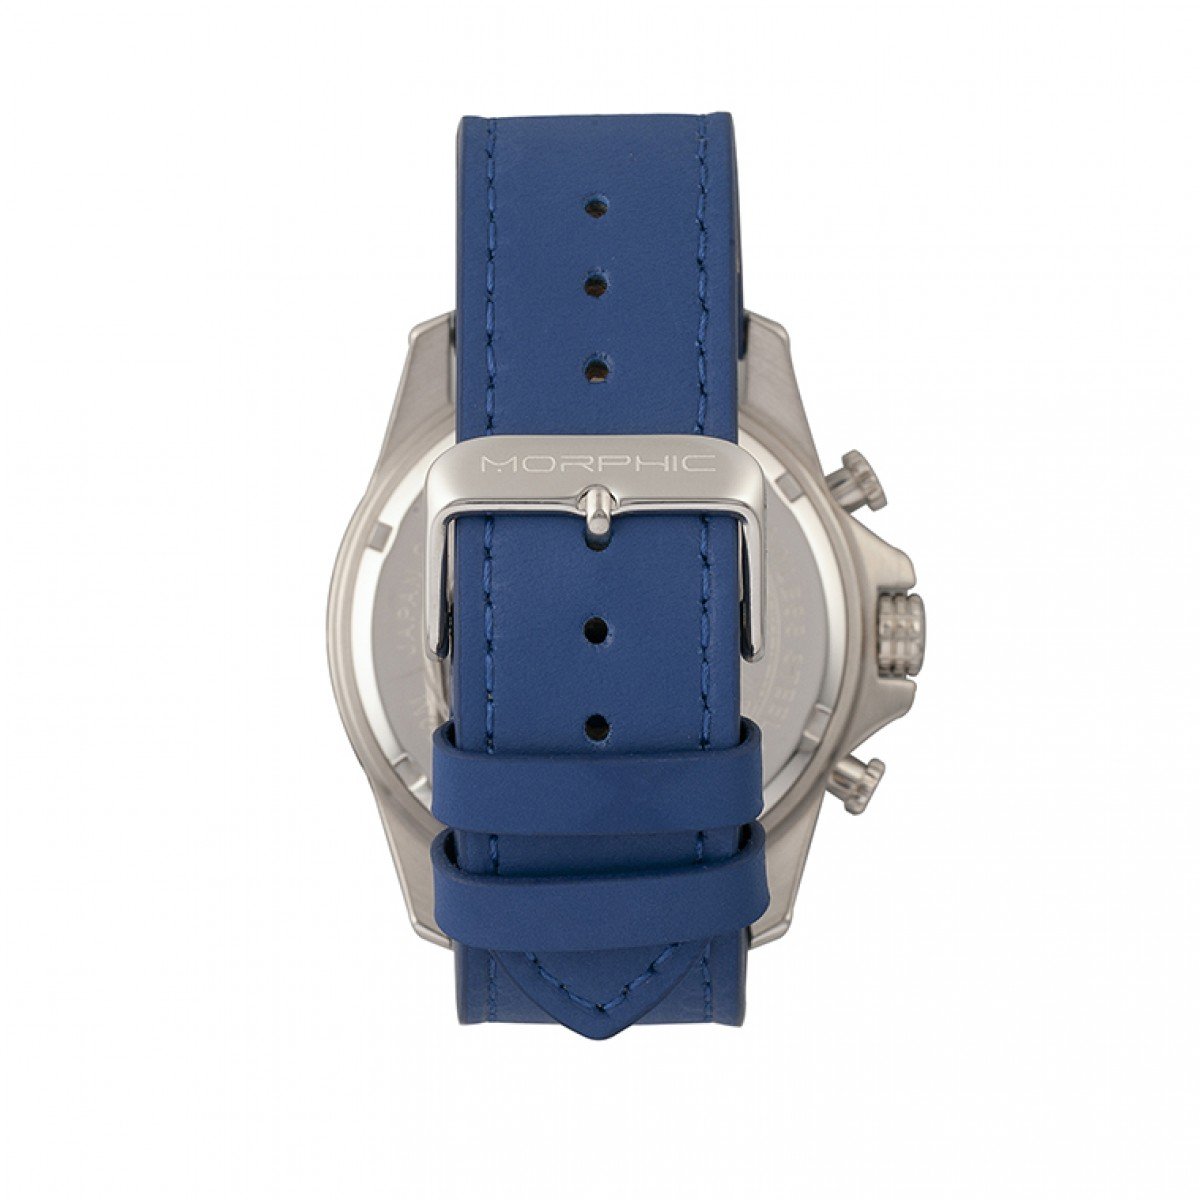 Morphic M57 Series Chronograph Leather-Band Watch - Silver/Blue - MPH5702